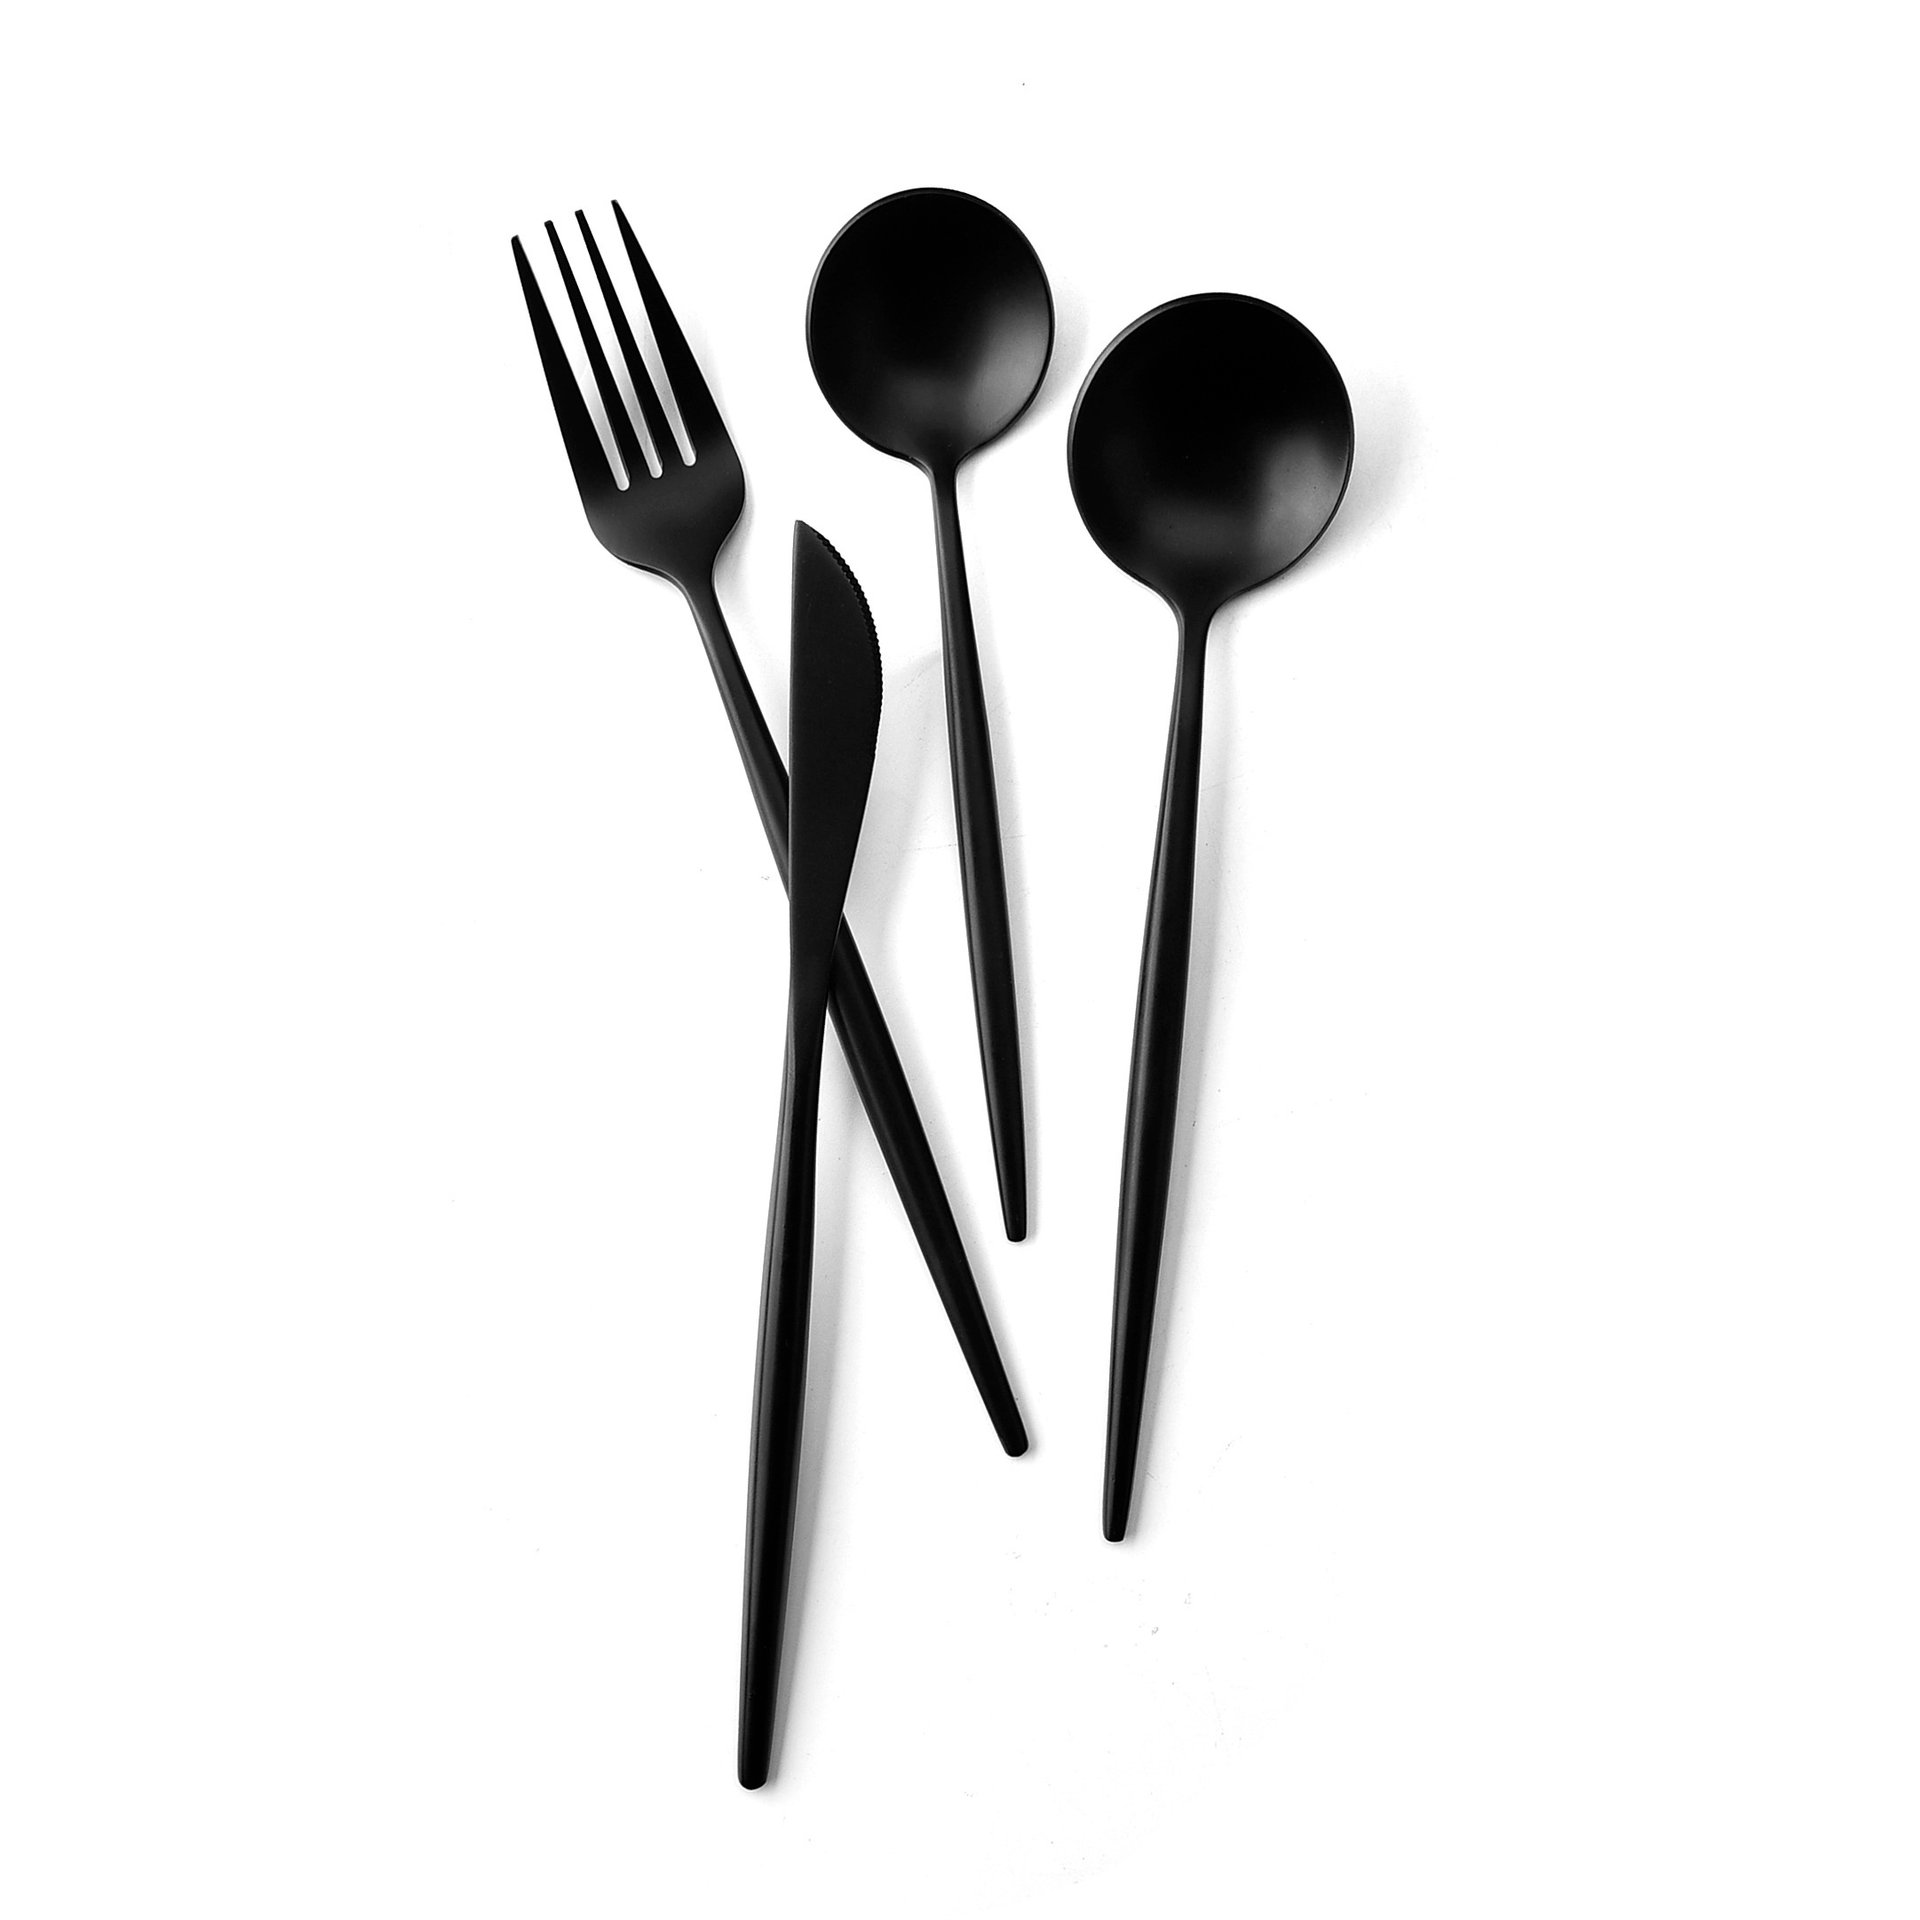 4-Piece Cutlery Set - Black fork, knife and spoon BH7411